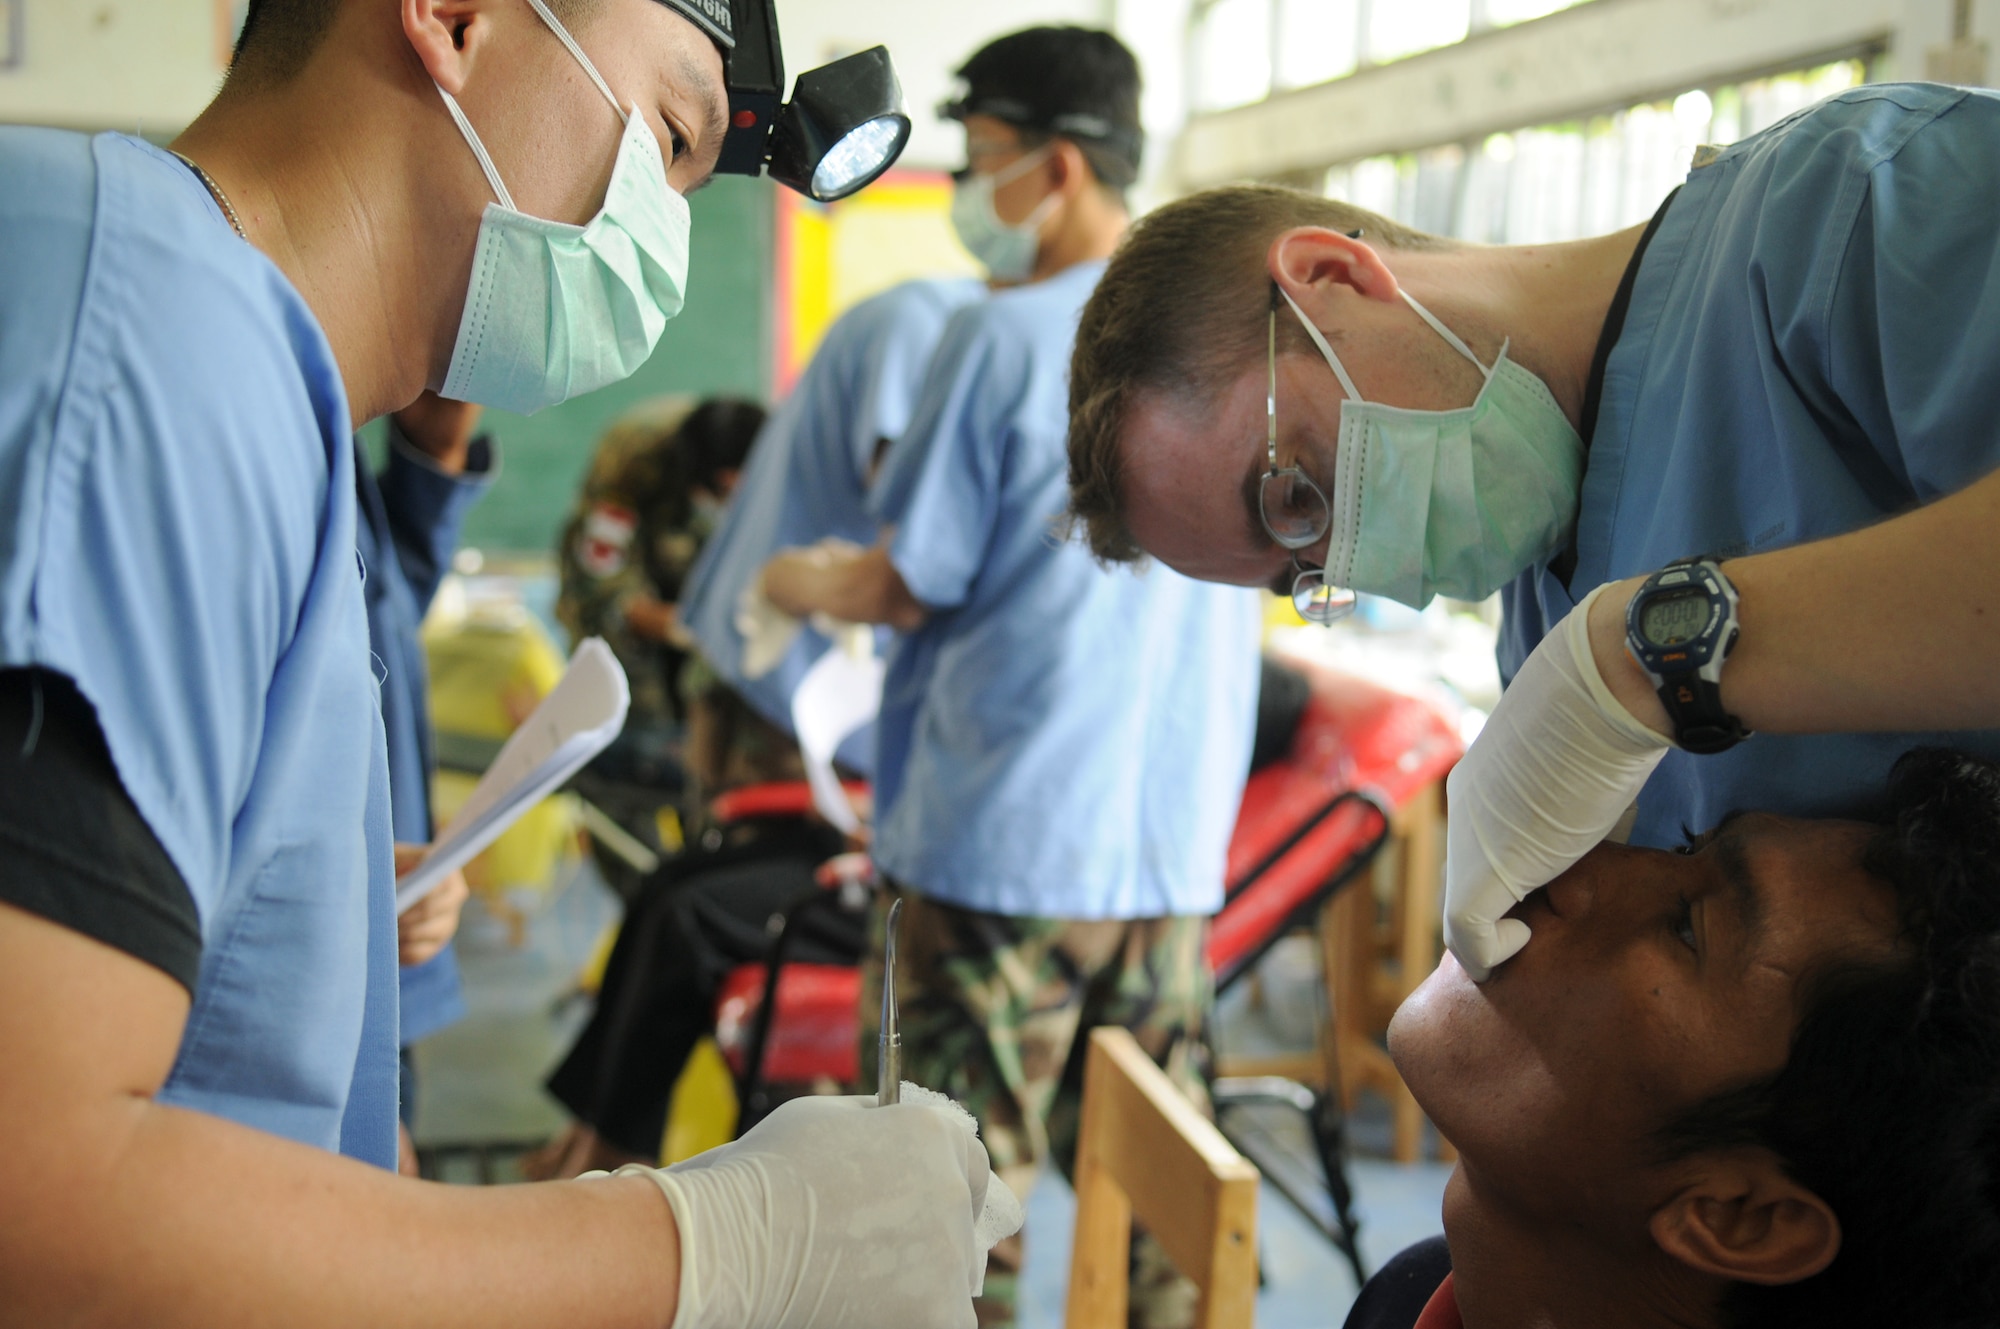 Staff Sgt. Scotty Scott (left) assists Capt. Dana Jensen (right) with a tooth extraction during a joint and multinational humanitarian mission to provide much needed dental care to Thailand's underprivileged during Cope Tiger 2009 on March 16. Cope Tiger is an annual exercise conducted in Thailand to improve combat readiness and combined and joint interoperability of U.S., Thai and Singaporean forces while enhancing regional security and providing humanitarian support. Captain Jensen is a dentist from the 18th Dental Squadron at Kadena Air Base, Japan. Sergeant Scott is a dental technician from the 374th Dental Squadron at Yokota AB. (U.S. Air Force photo/Staff Sgt. Angelique Perez) 